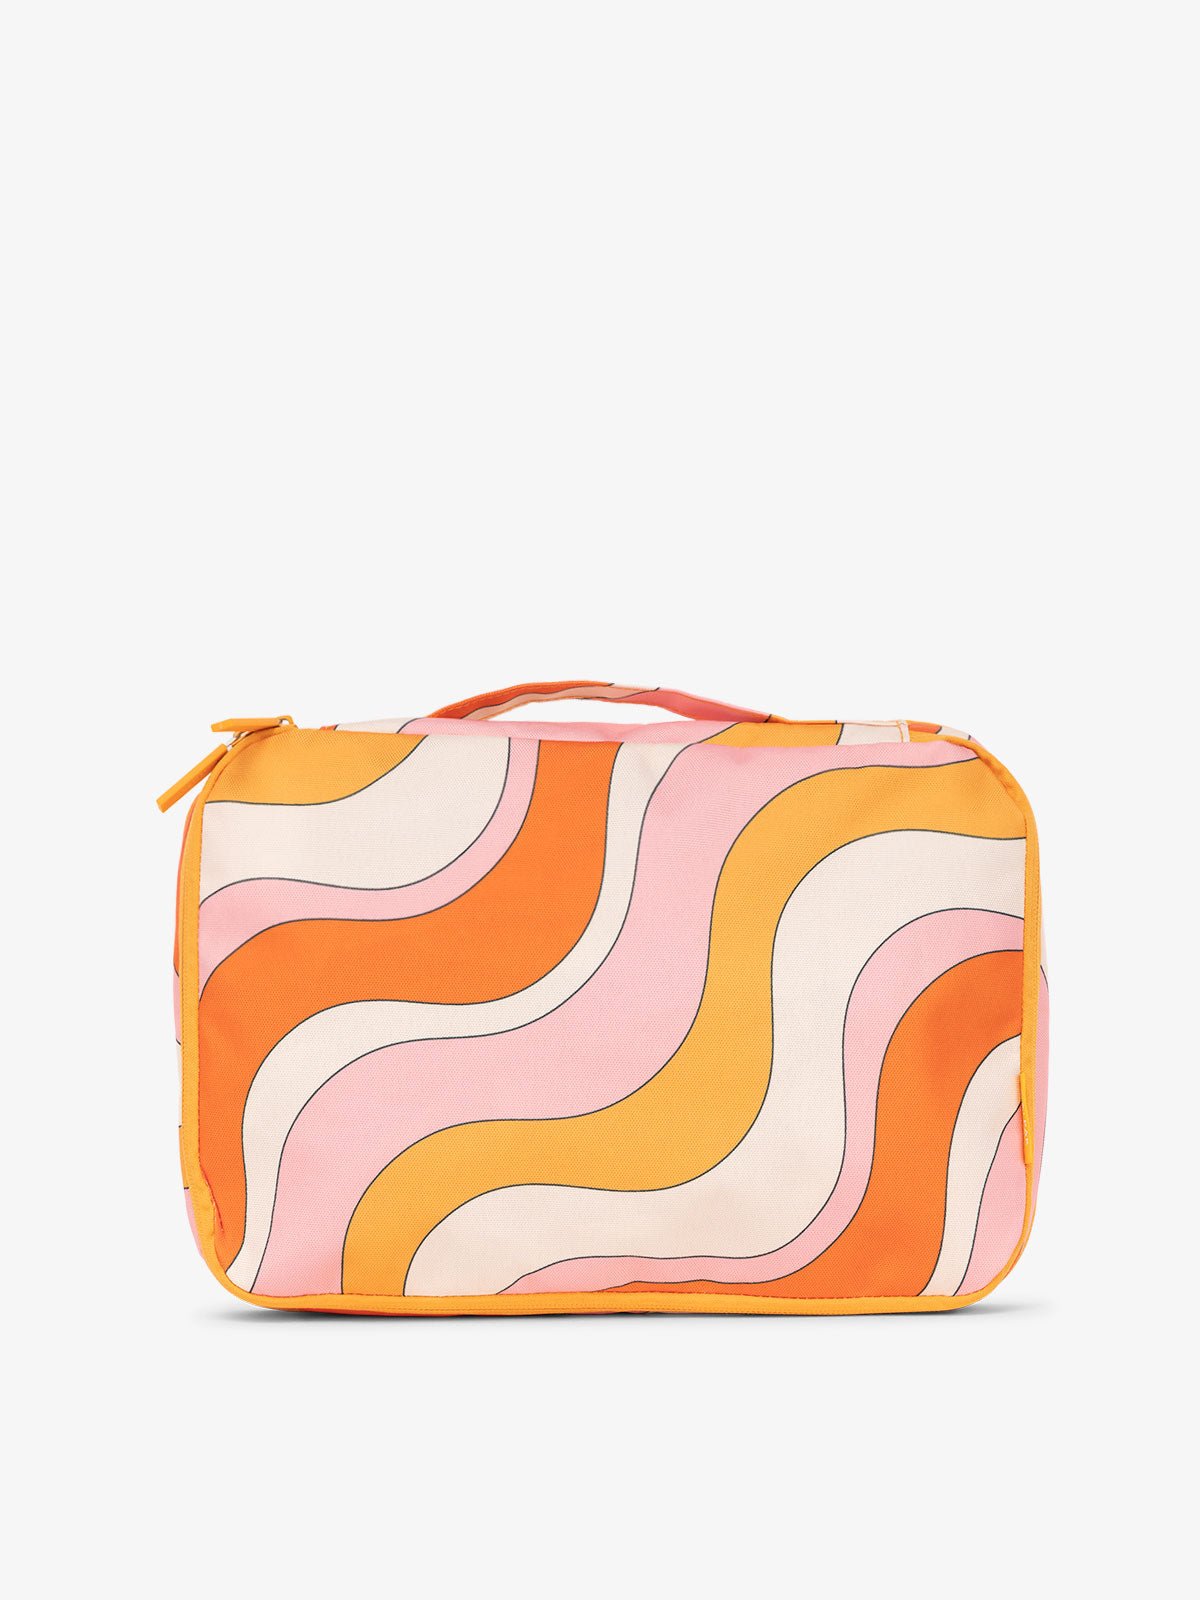 CALPAK packing cubes with top handle in orange and pink wavy print